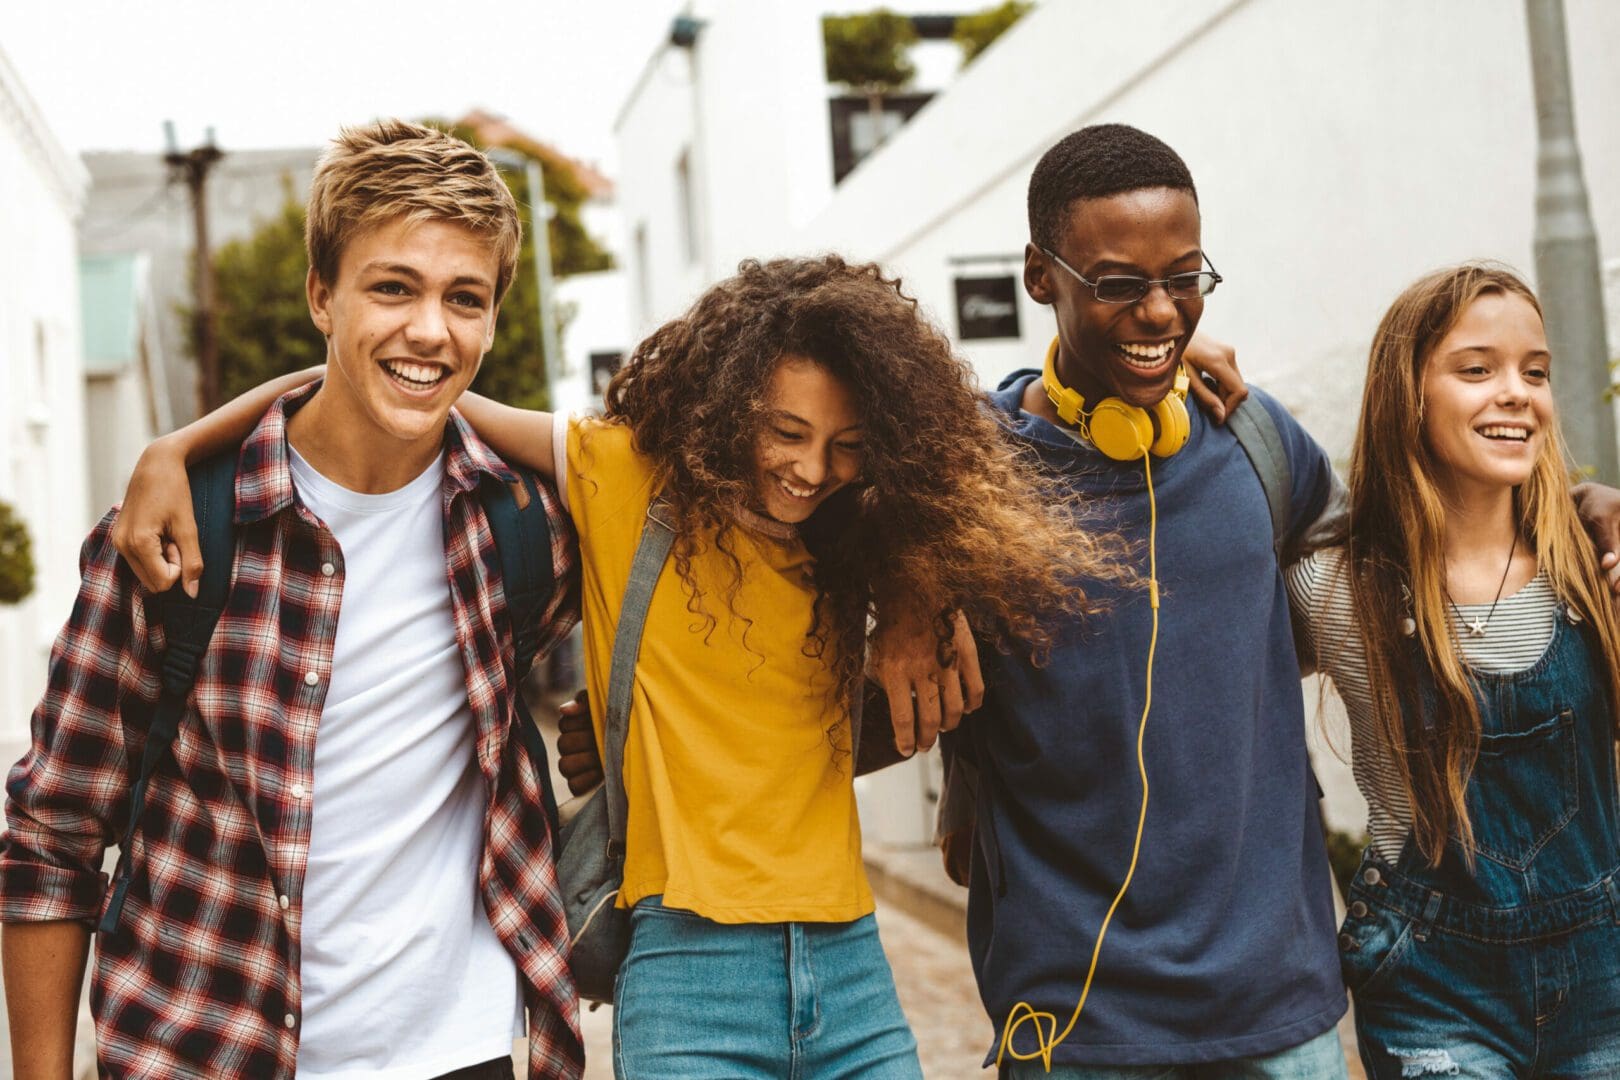 Teenage boys and girls walking in the street holding each other. Smiling college friends walking together in street wearing college bags having fun.